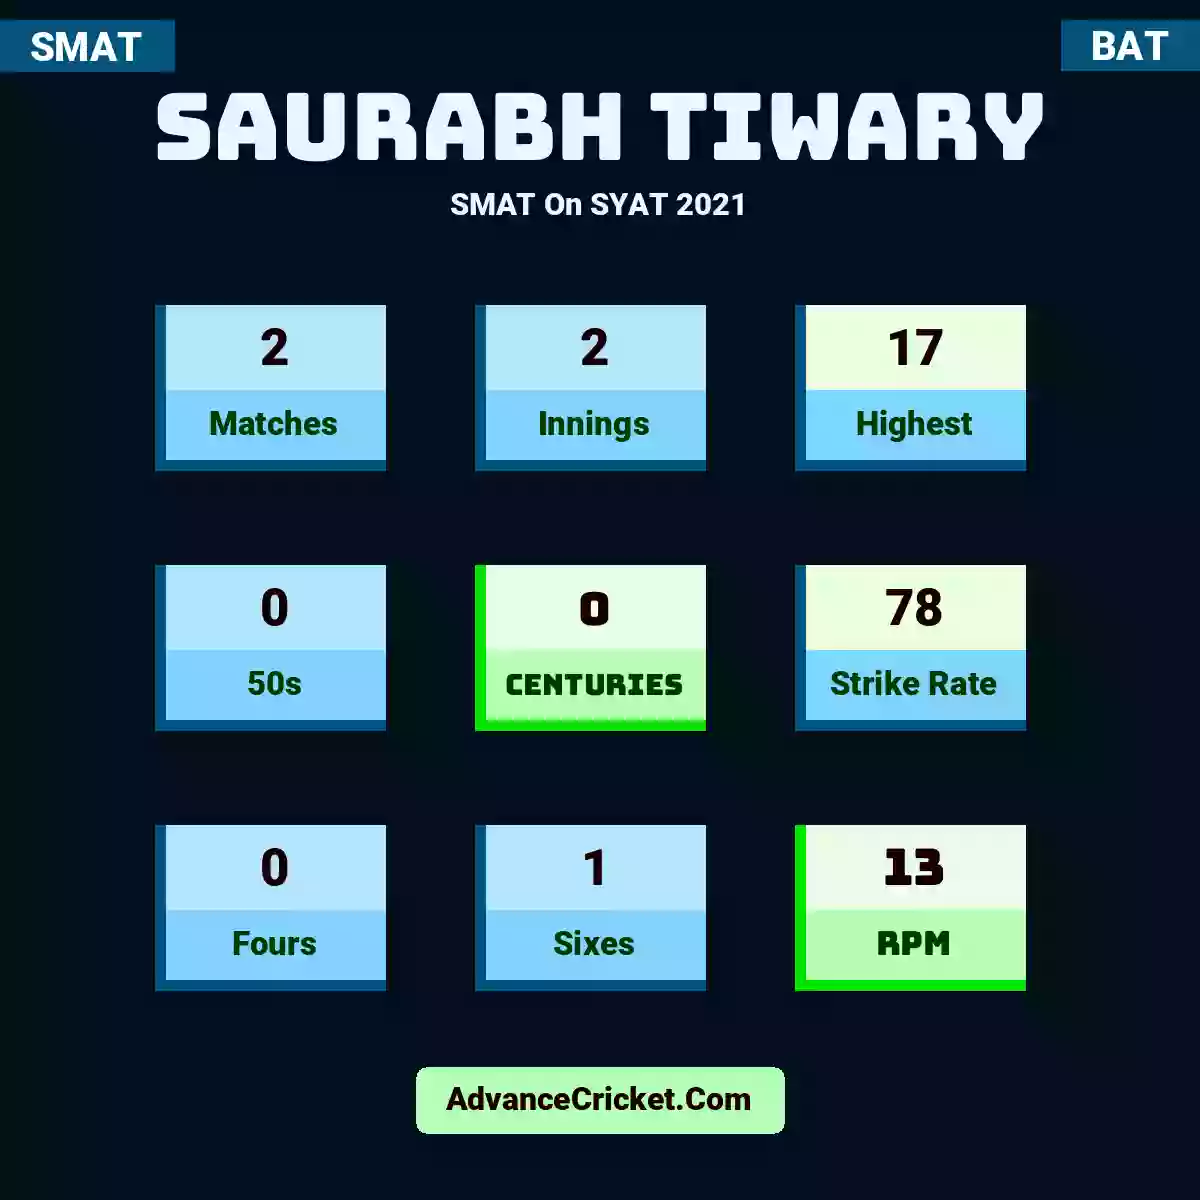 Saurabh Tiwary SMAT  On SYAT 2021, Saurabh Tiwary played 2 matches, scored 17 runs as highest, 0 half-centuries, and 0 centuries, with a strike rate of 78. S.Tiwary hit 0 fours and 1 sixes, with an RPM of 13.